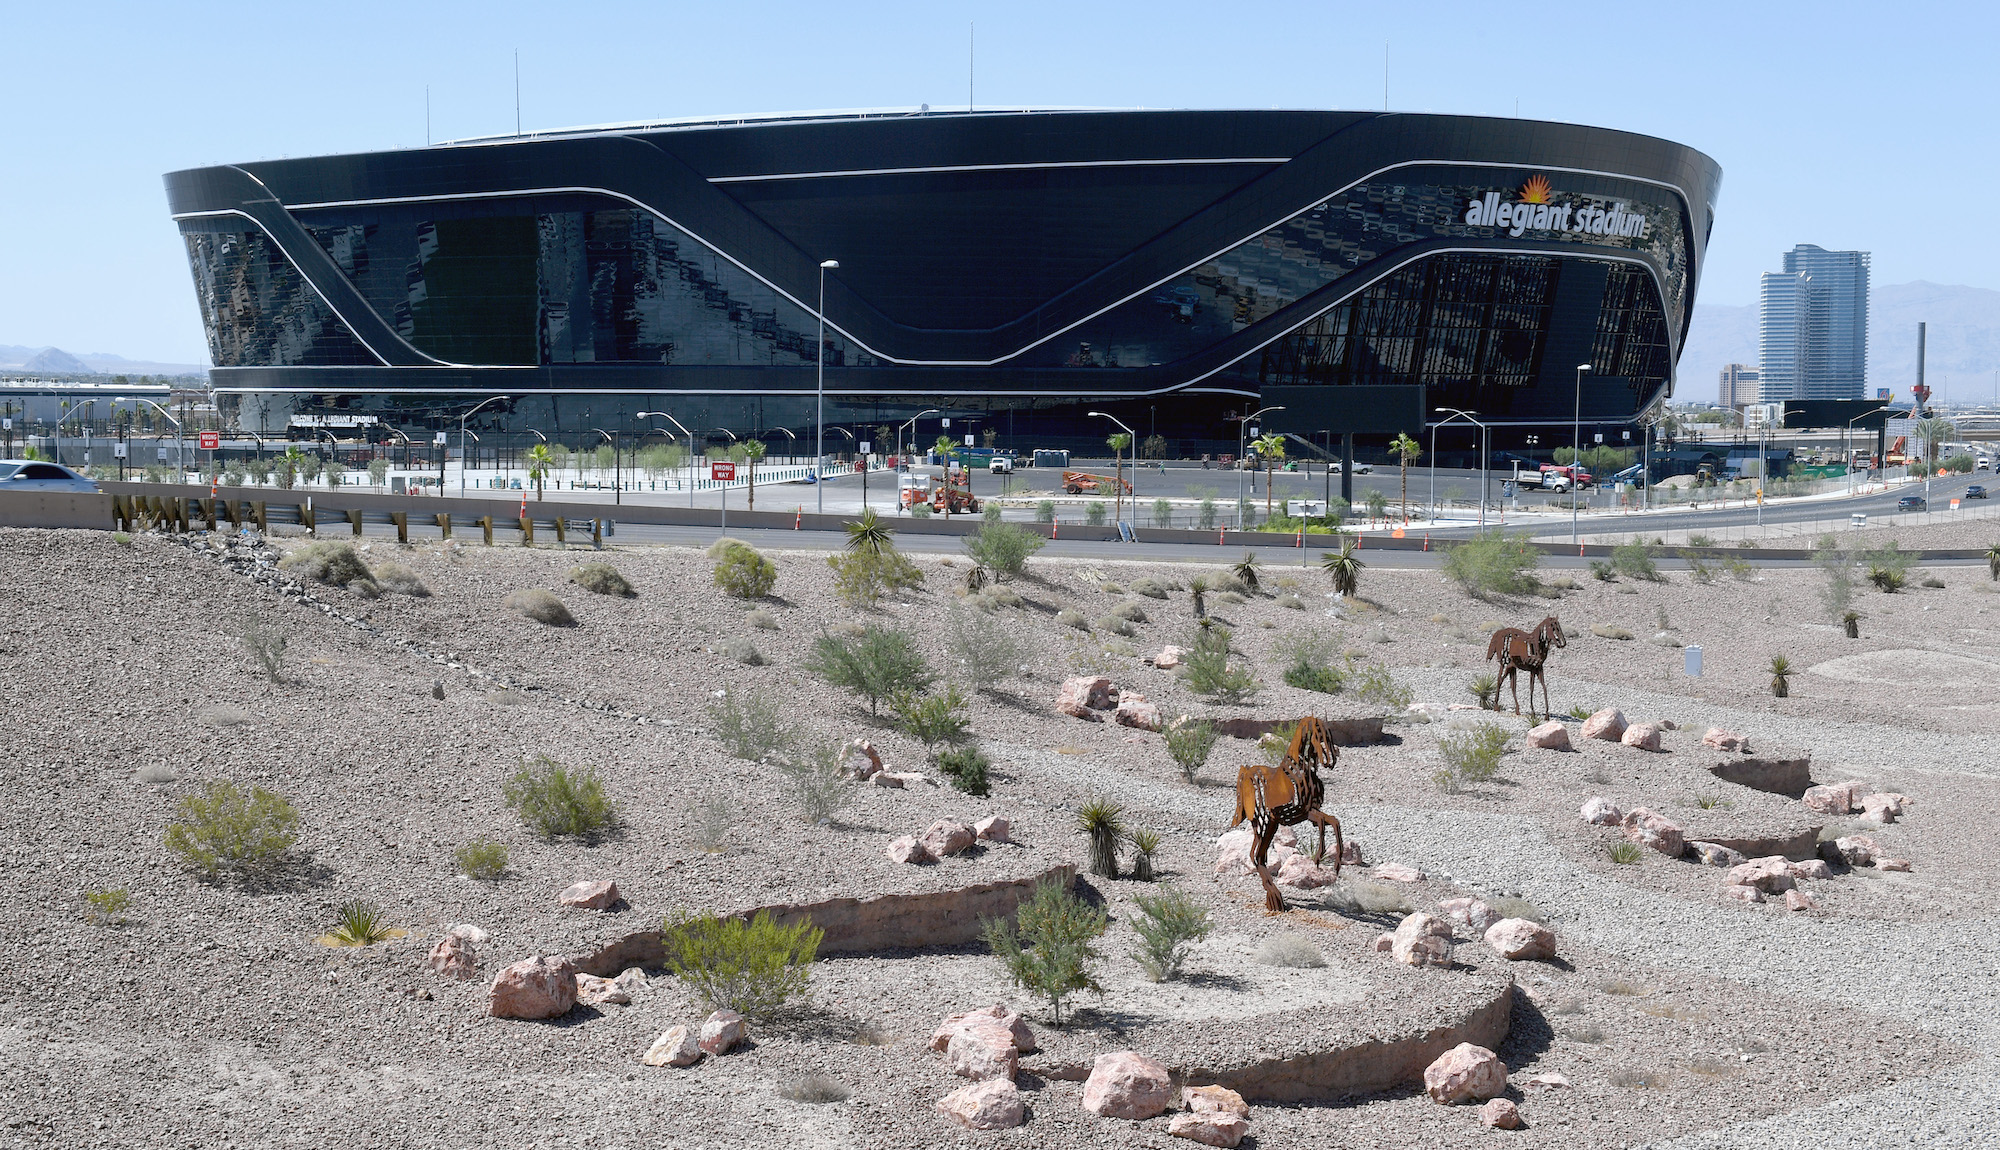 LAS VEGAS, NEVADA - JULY 01: Construction continues at Allegiant Stadium, the USD 2 billion, glass-domed future home of the Las Vegas Raiders on July 1, 2020 in Las Vegas, Nevada. The Raiders and the UNLV Rebels football teams are scheduled to begin play at the 65,000-seat facility in their 2020 seasons. (Photo by Ethan Miller/Getty Images)